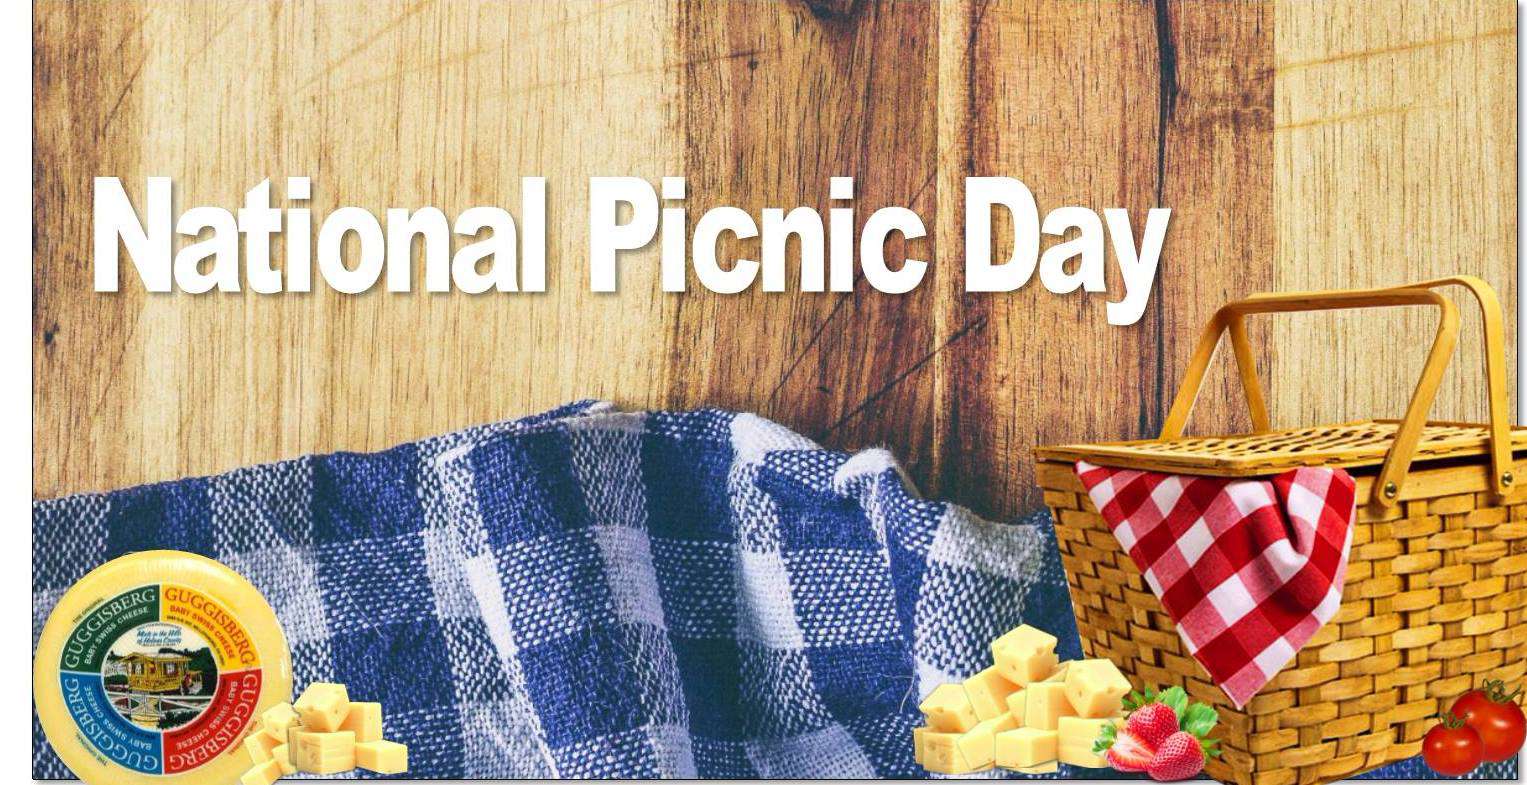 National Picnic Day Wishes Beautiful Image